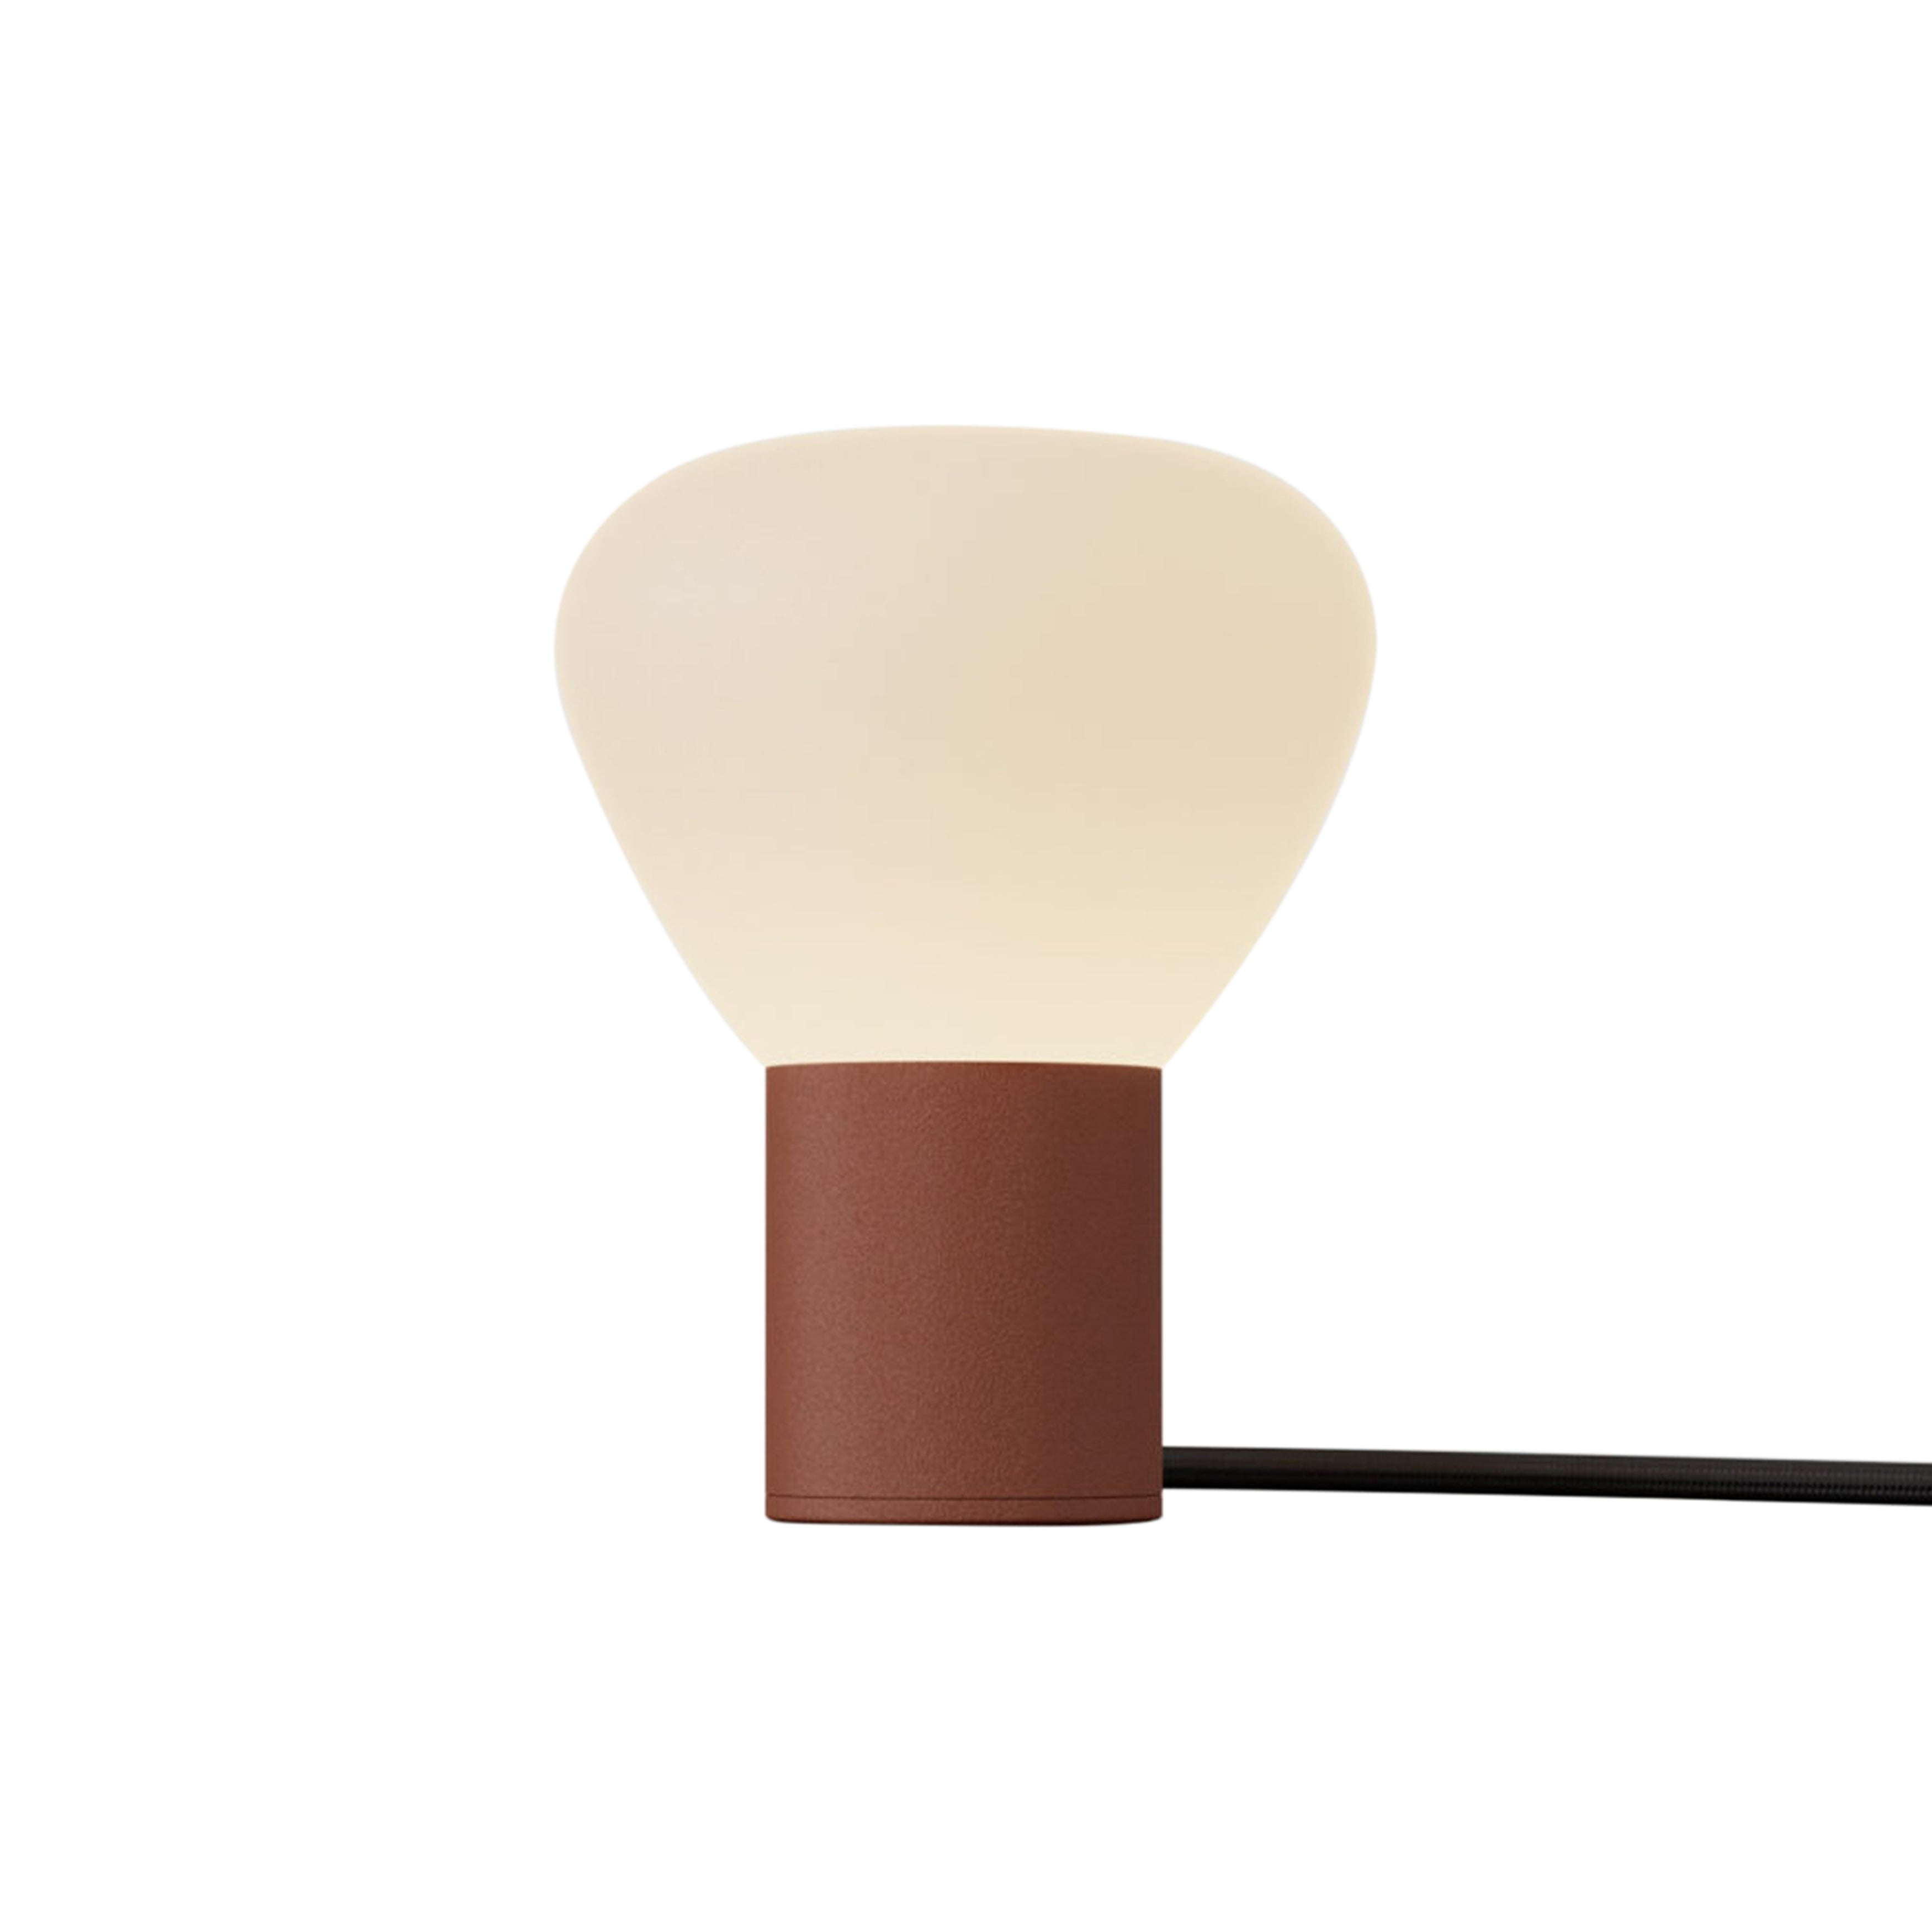 Parc 01 Table Lamp: Handswitch +  Terracotta + Black